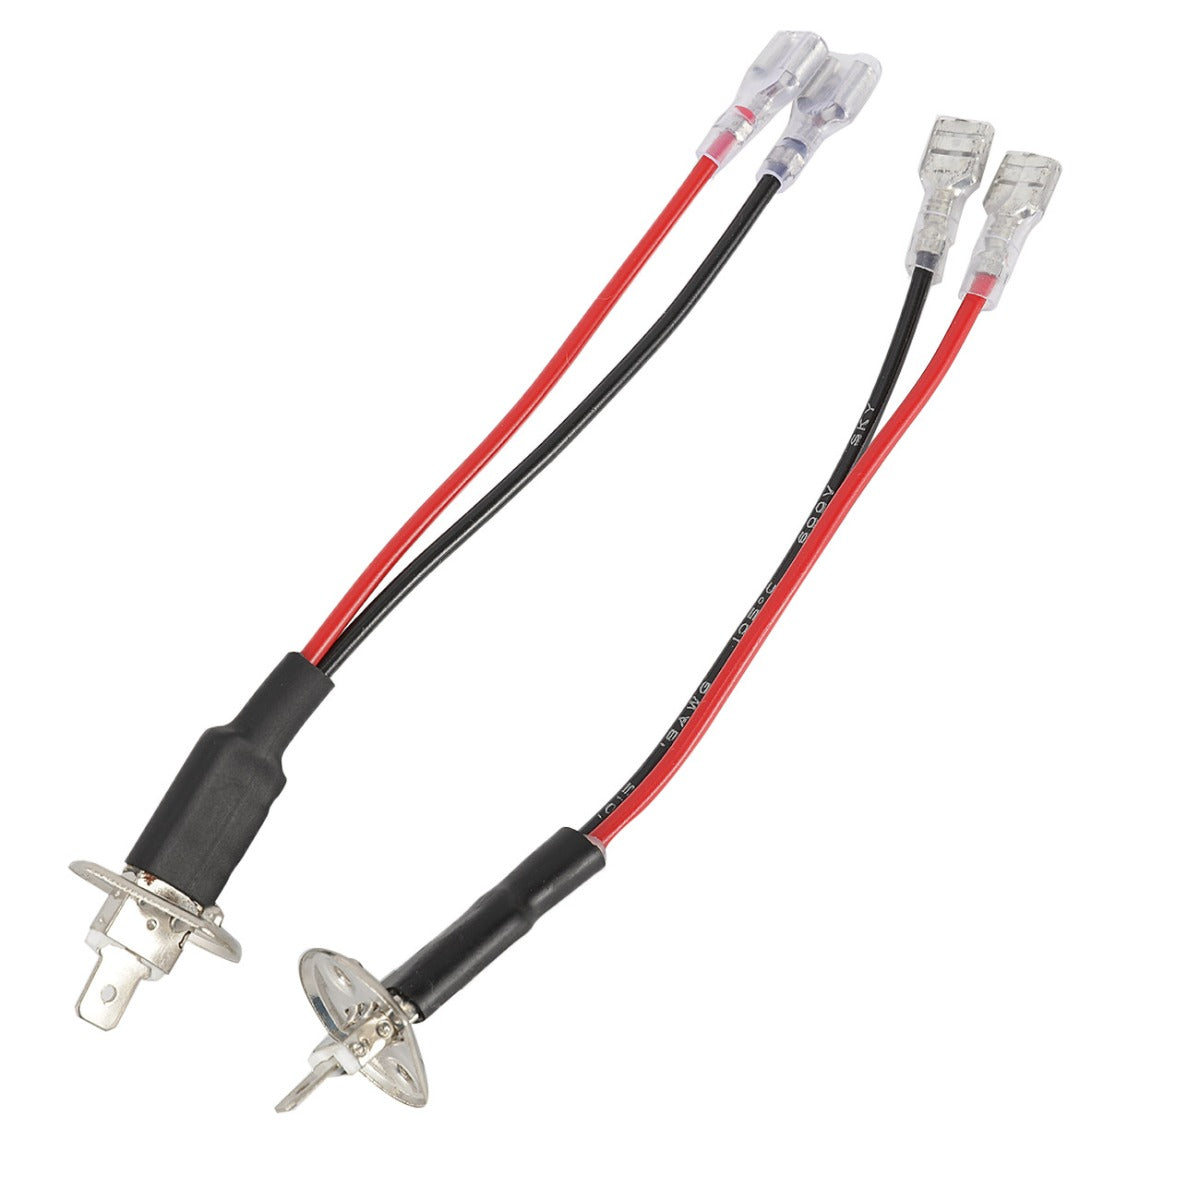 2x H1 LED Headlight Replacement Male Plug Single Diode Converter Wiring  Adapter